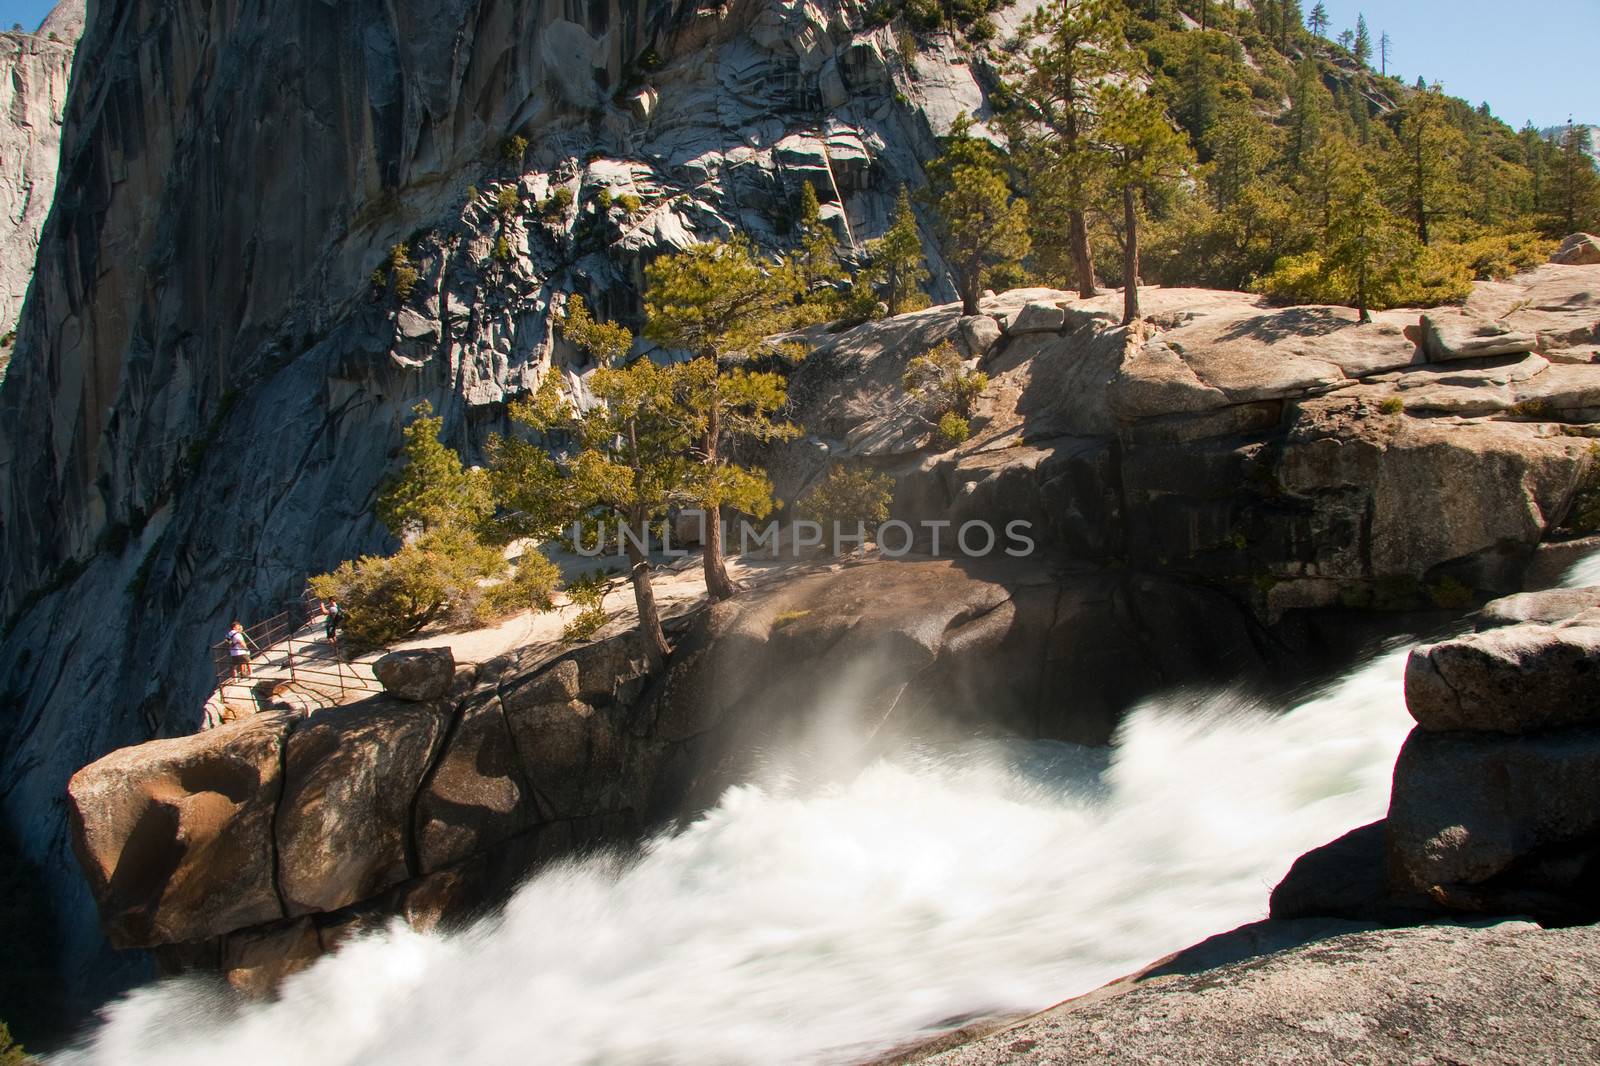 Scenic view of waterfall in Yosemite National Park with Half Dome rock formations in background, California, U.S.A.